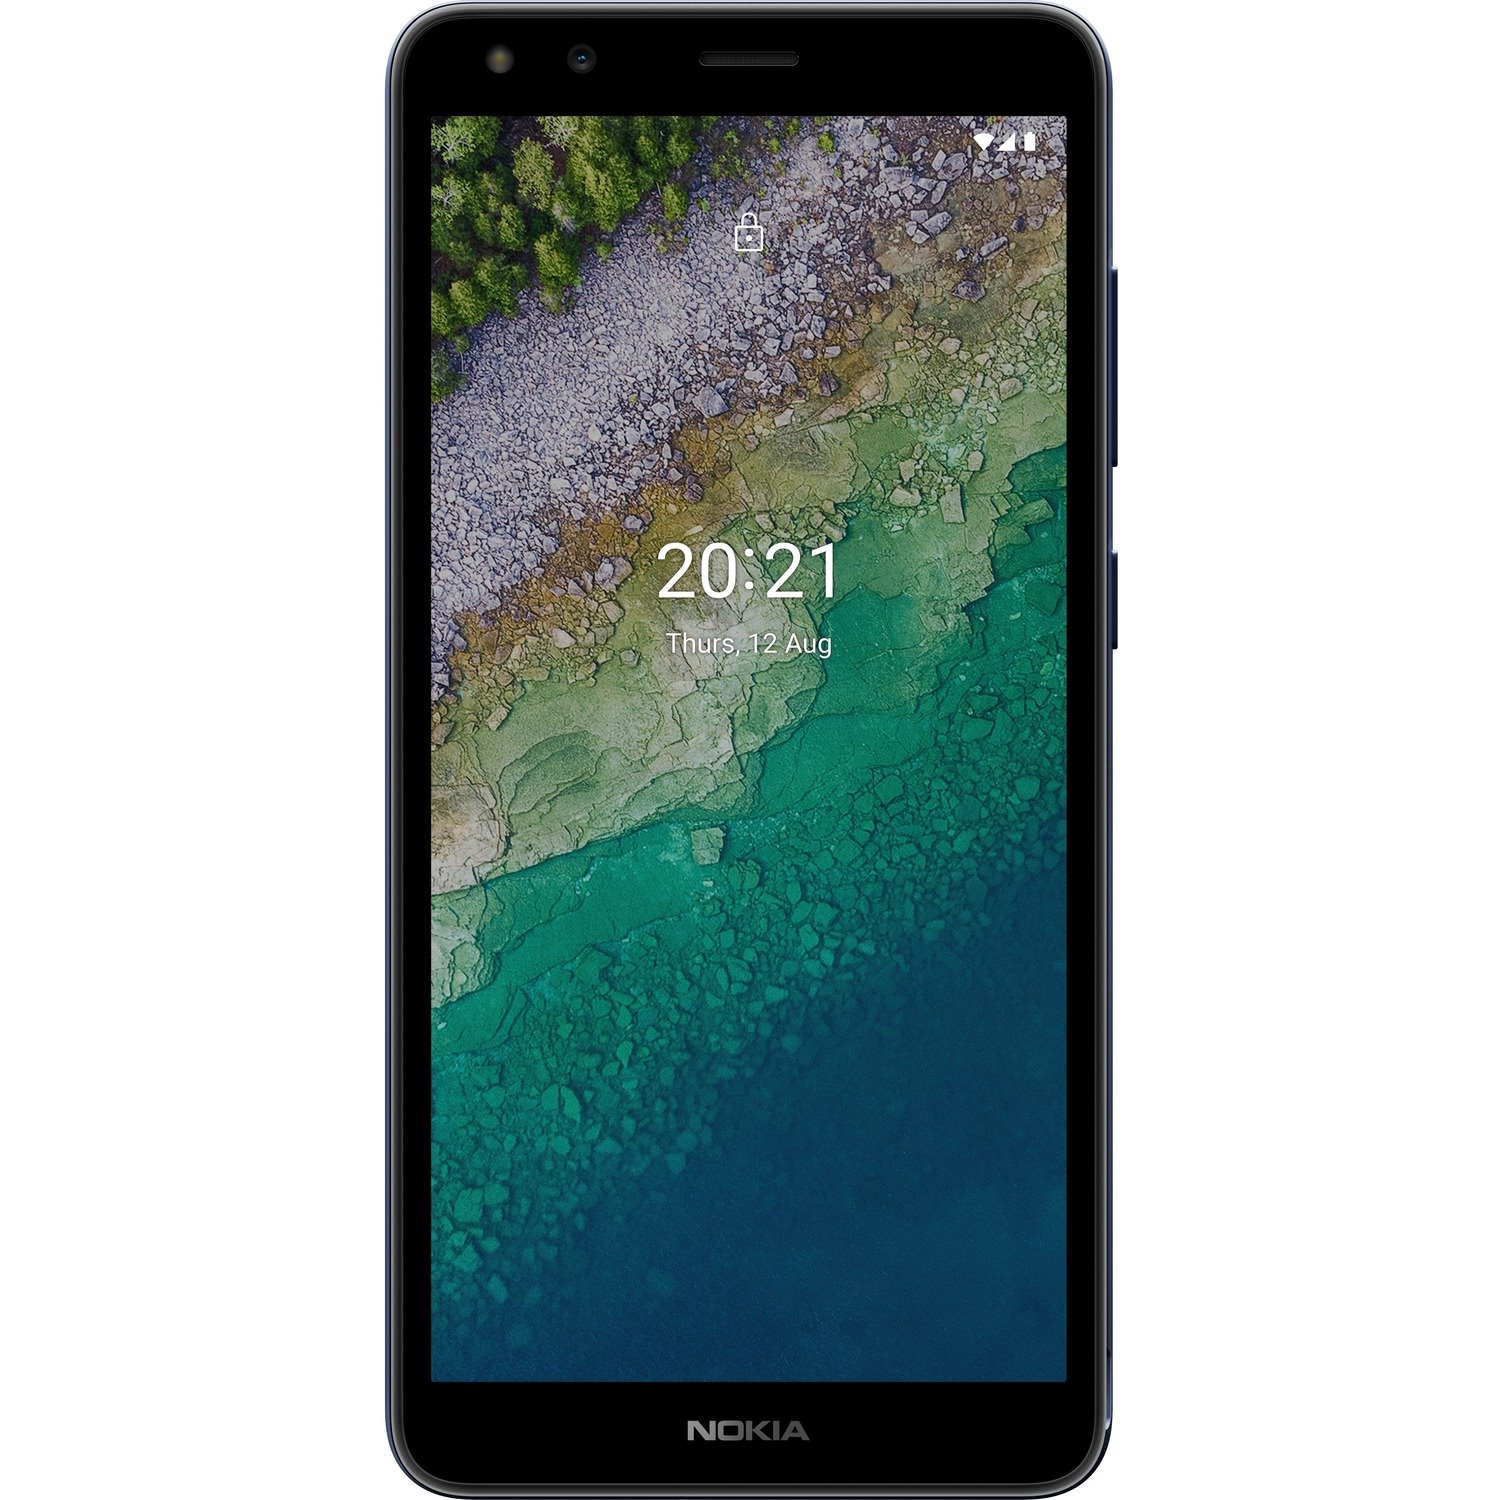 Nokia C01 Plus 16 GB Smartphone - 13.8 cm (5.5") LCD HD+ 720 x 1440 - Octa-core (Cortex A55Quad-core (4 Core) 1.60 GHz + Cortex A55 Quad-core (4 Core) 1.20 GHz - 2 GB RAM - Android 11 (Go Edition) - 4G - Blue